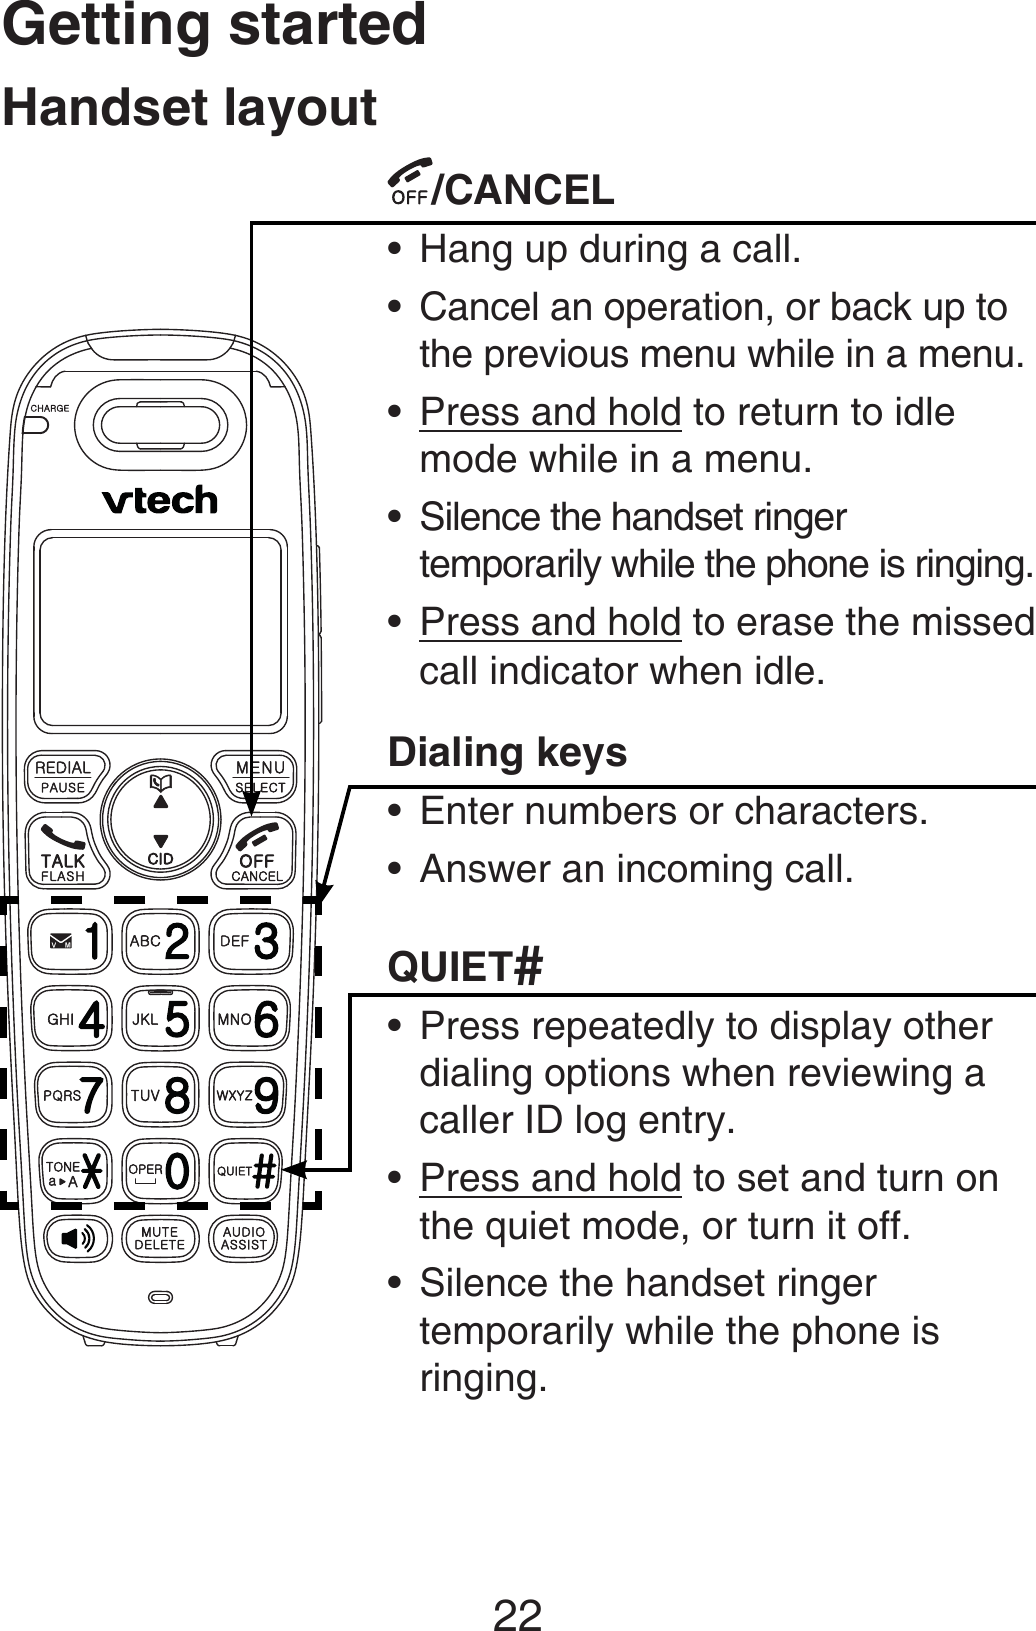 Getting started22/CANCELHang up during a call.Cancel an operation, or back up to the previous menu while in a menu.Press and hold to return to idle mode while in a menu.Silence the handset ringer temporarily while the phone is ringing.Press and hold to erase the missed call indicator when idle.Dialing keysEnter numbers or characters.Answer an incoming call.QUIET#Press repeatedly to display other dialing options when reviewing a caller ID log entry.Press and hold to set and turn on the quiet mode, or turn it off.Silence the handset ringer temporarily while the phone is ringing.••••••••••Handset layout